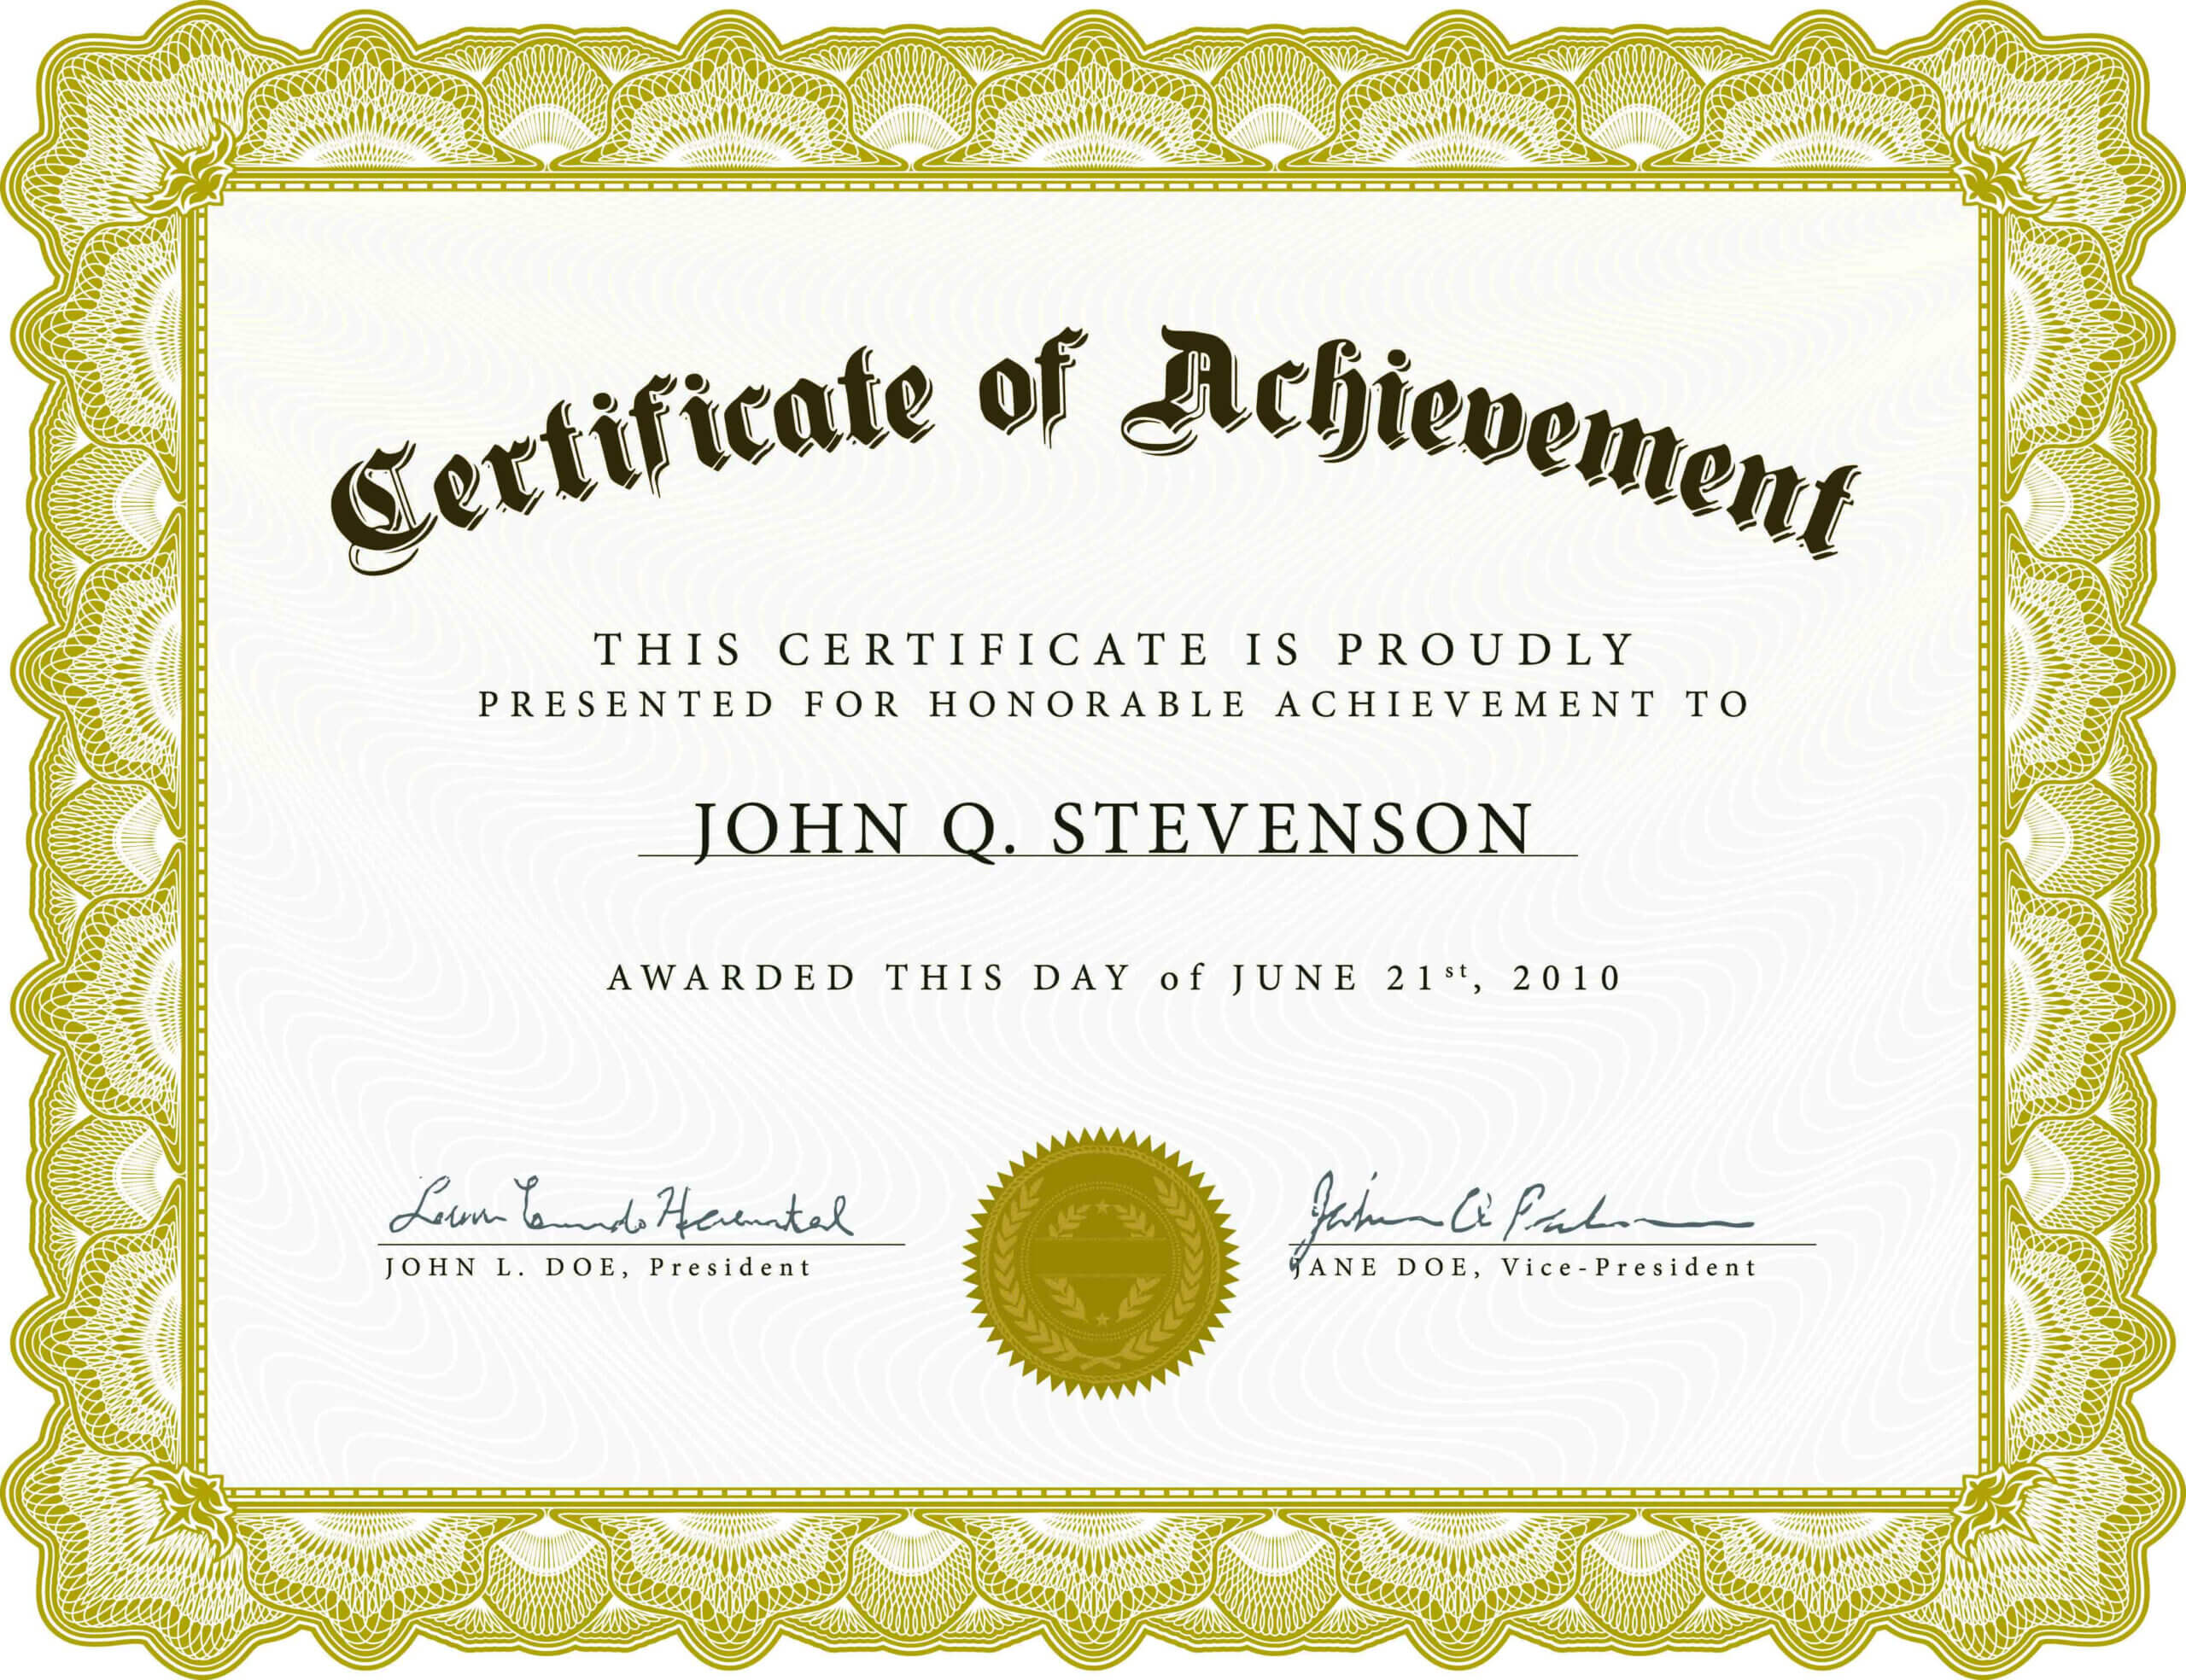 Certificate Of Academic Achievement Template | Photo Stock Intended For Blank Certificate Templates Free Download